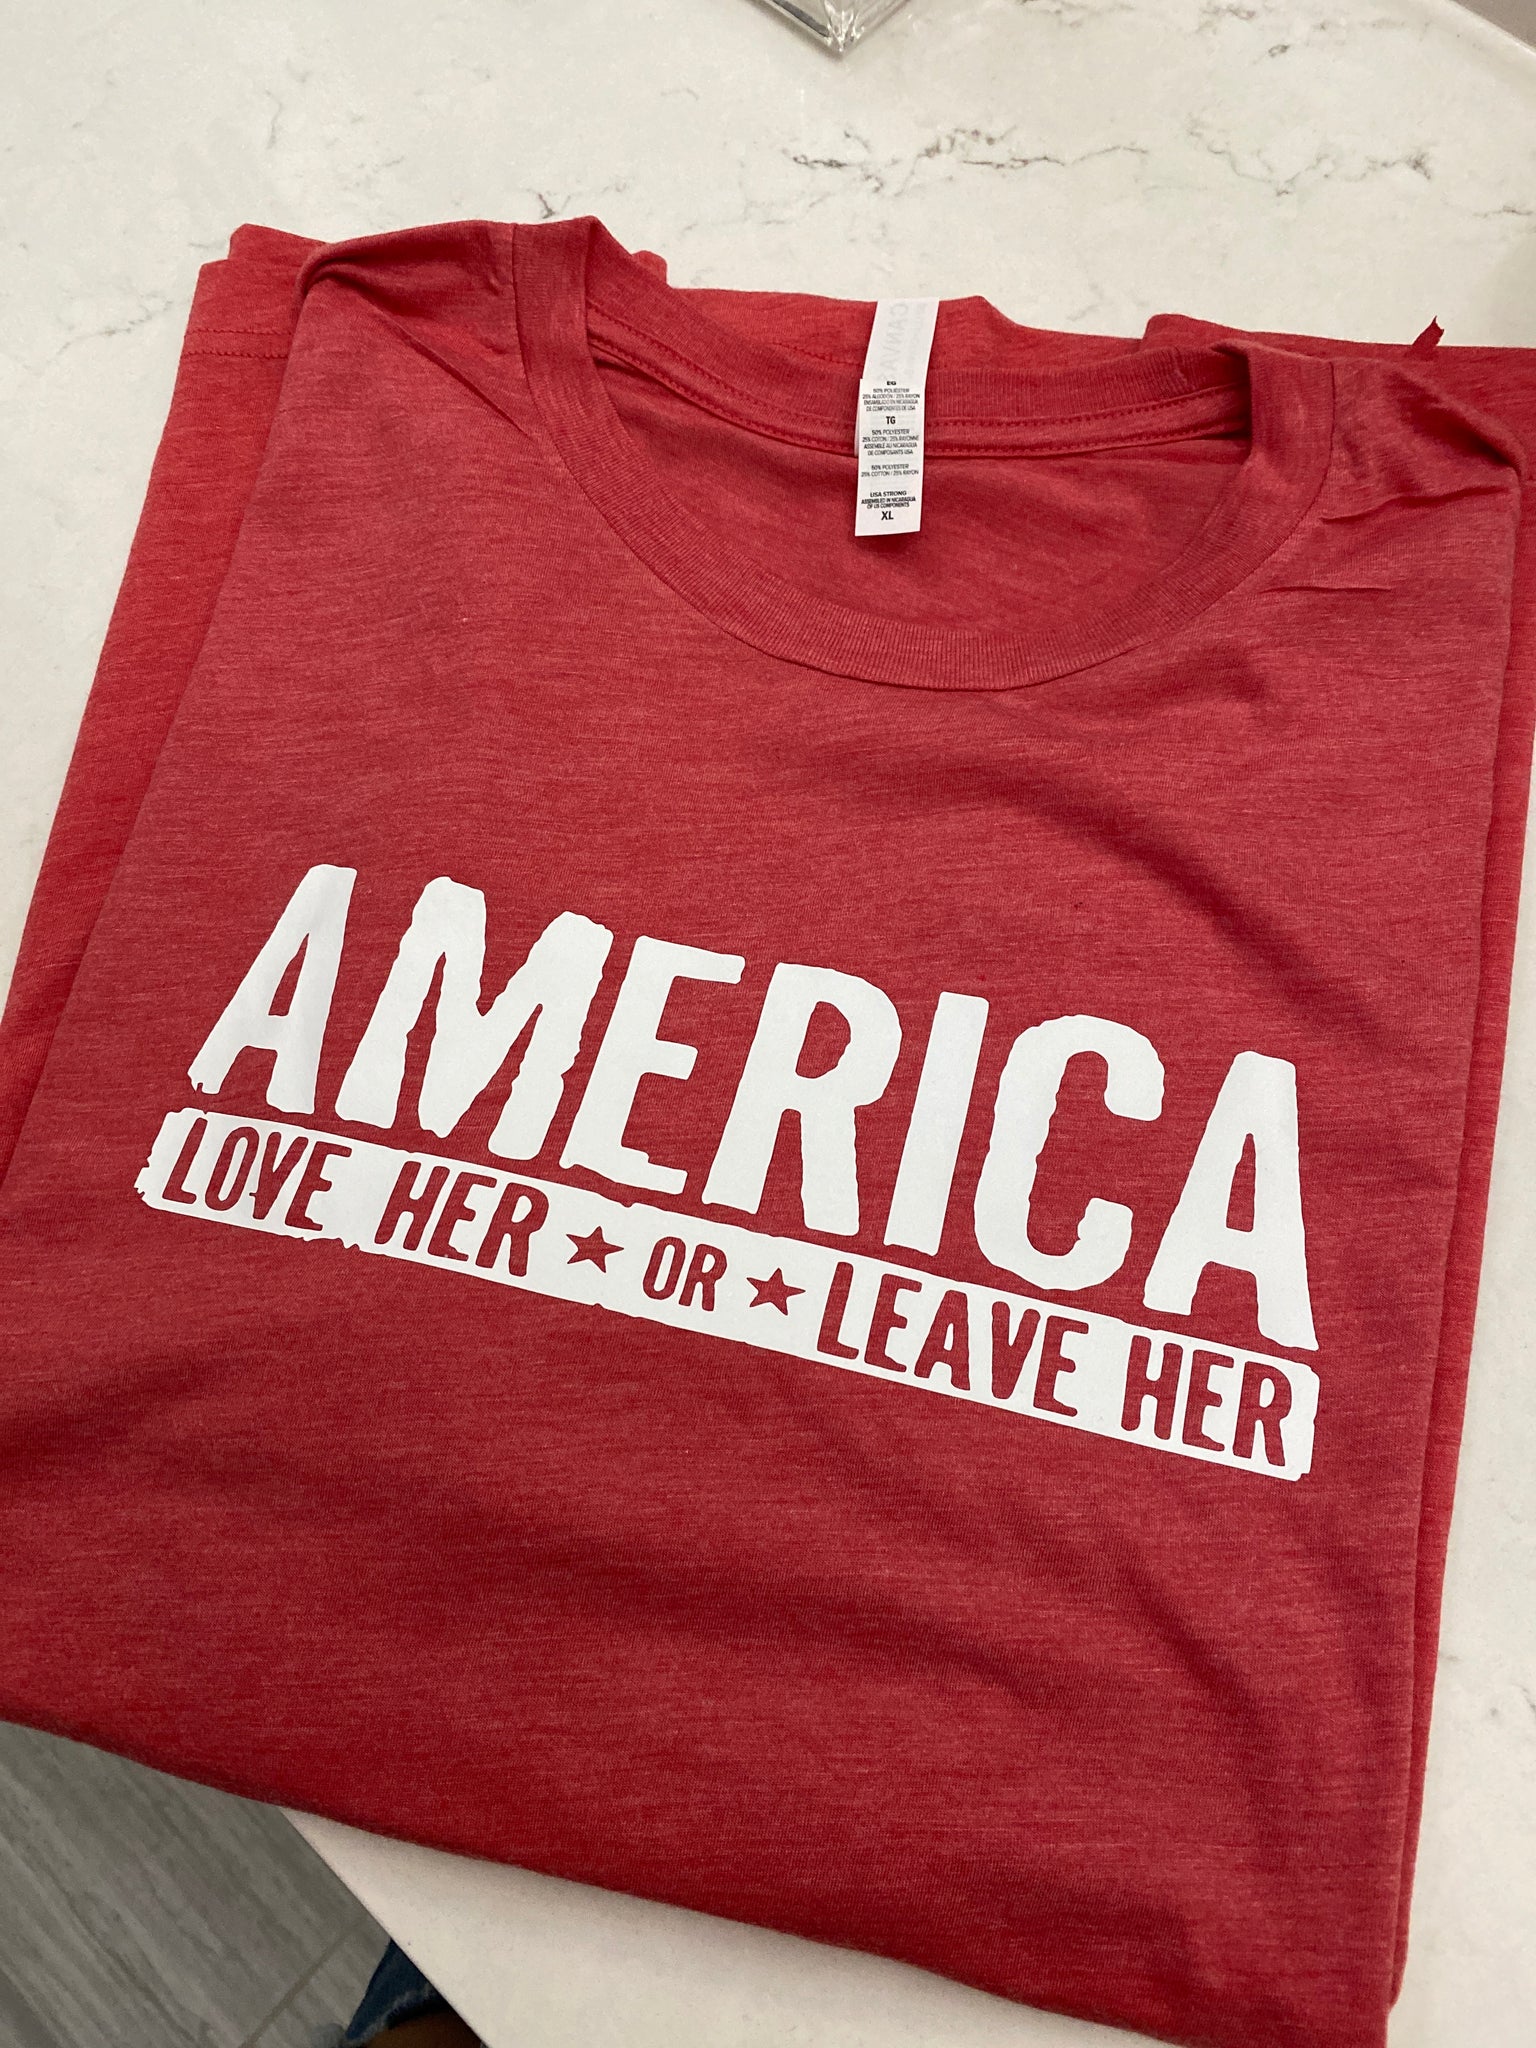 America love her or leave her